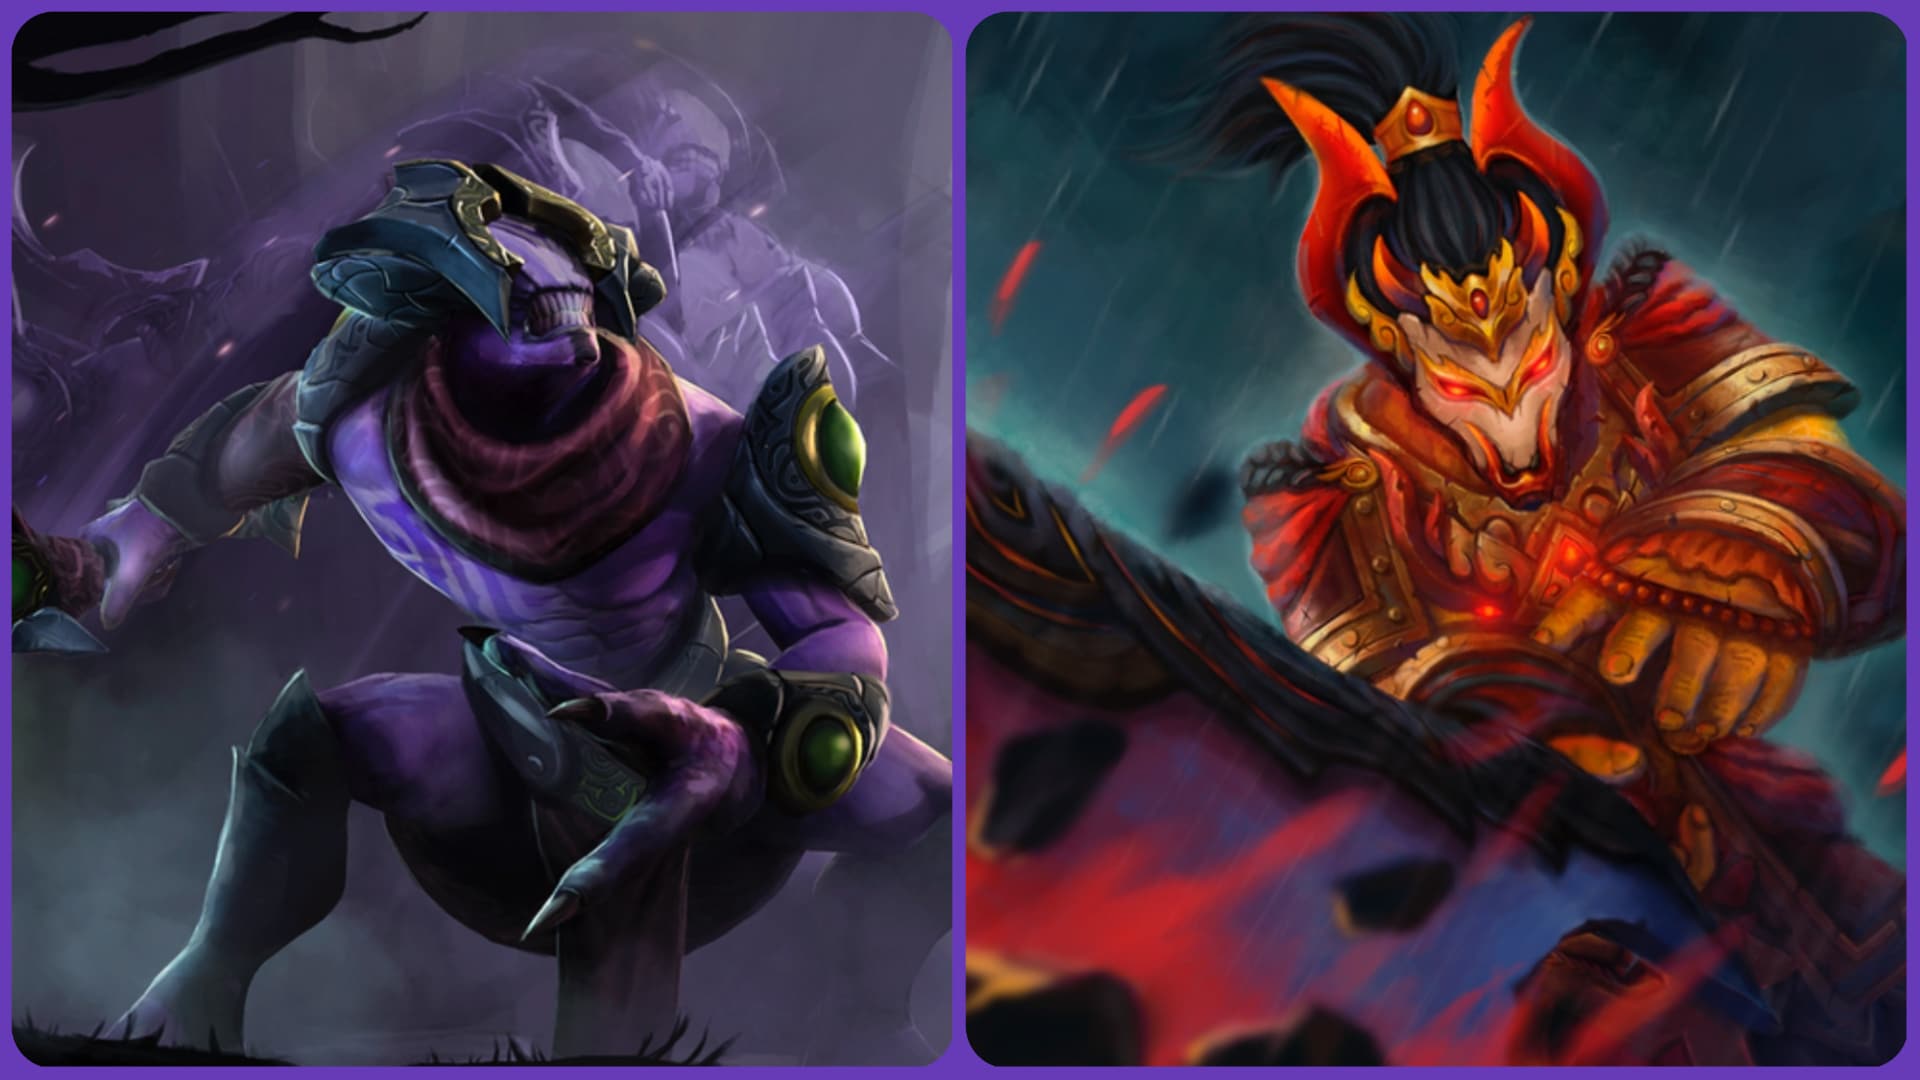 Dota 2 - Battle Pass 2022 - Win with a Carry Hero with Nice Pecs in Cavern Crawl - ft - Faceless Void and Juggernaut destroy their enemies in battle